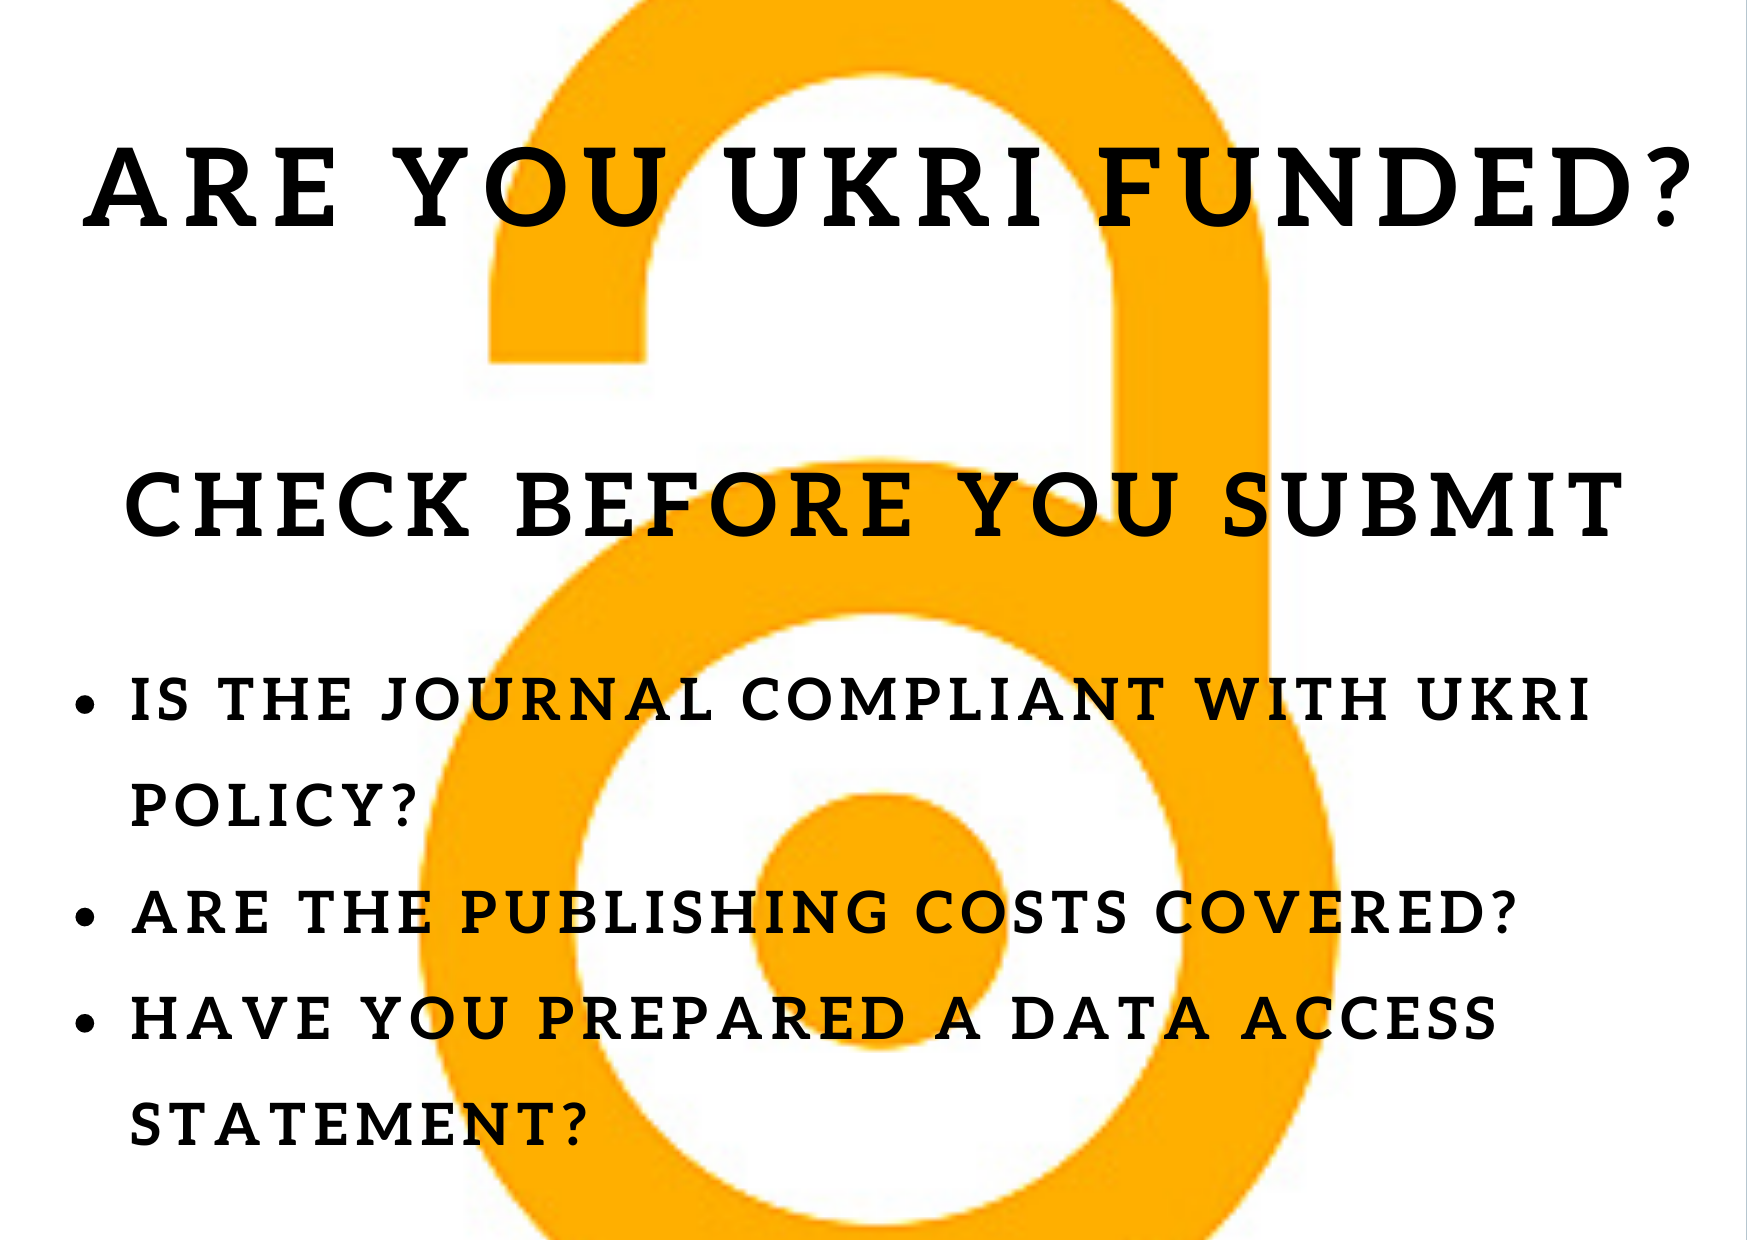 A checklist for UKRI funded authors